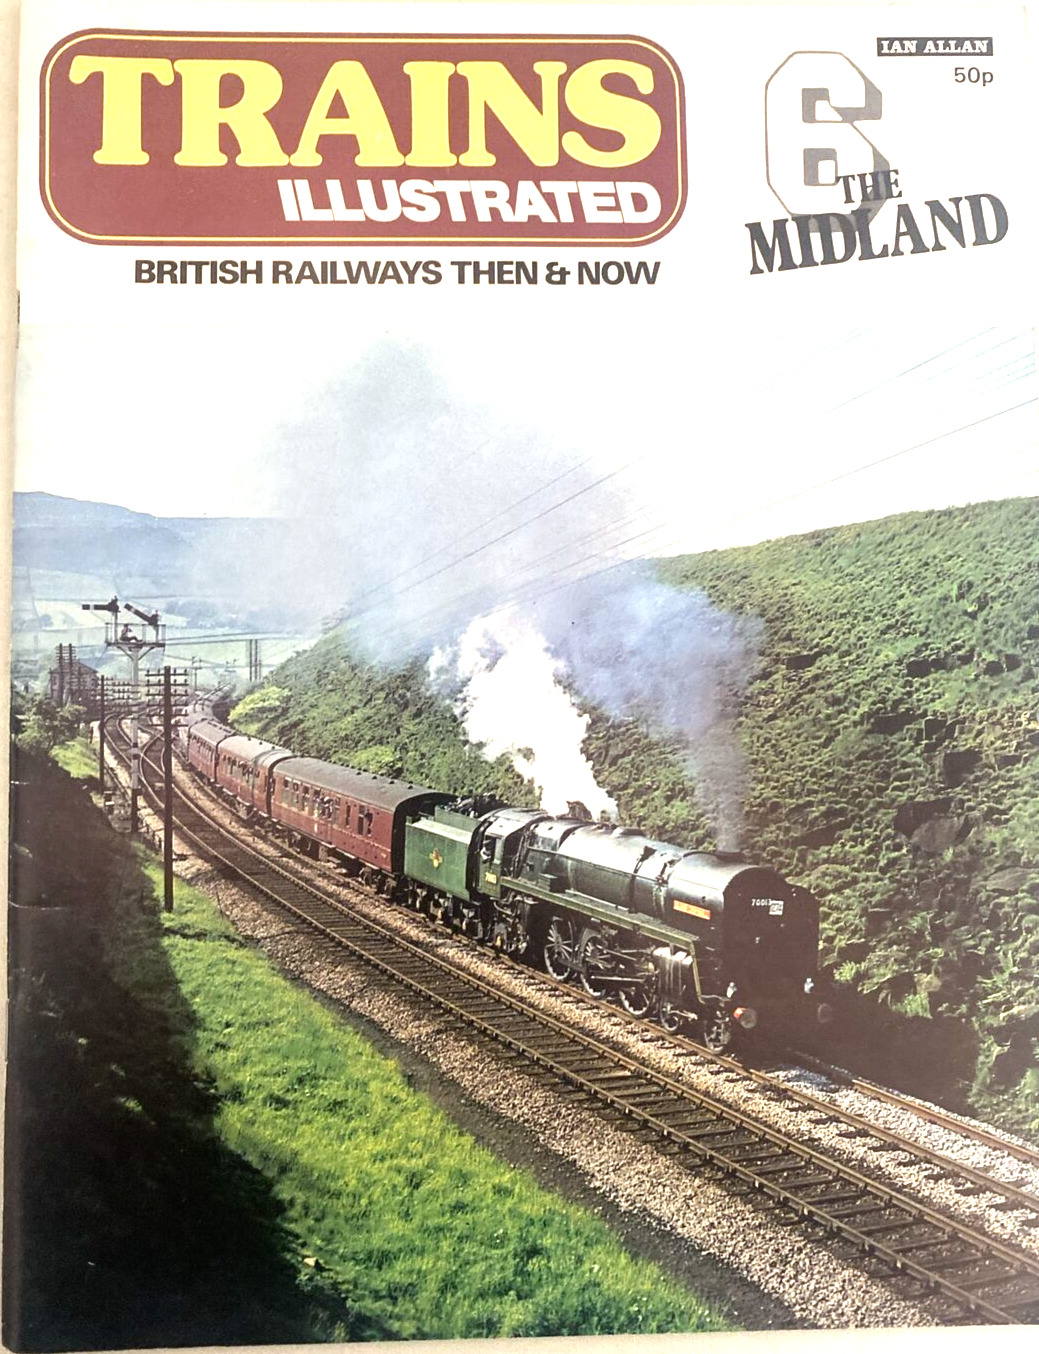 TRAINS ILLUSTRATED. # 6. VINTAGE 197O\'S. THE MIDLAND. GOOD/VERY GOOD CONDITION.